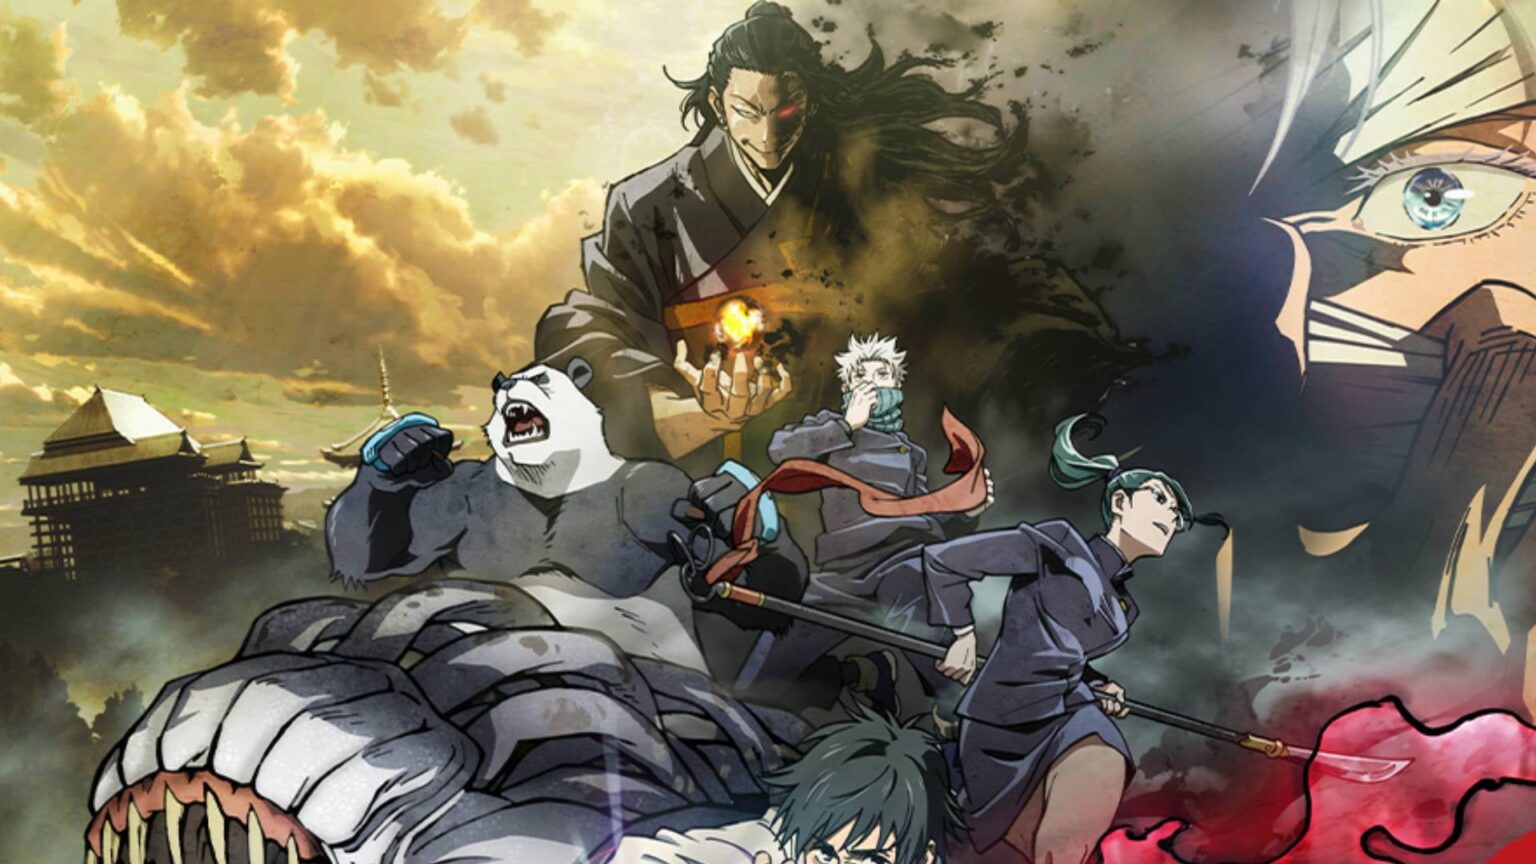 'Jujutsu Kaisen 0: The Movie' is the anime movie that's breaking all kinds of records but, can you watch it online yet? Here's everything you need to know.